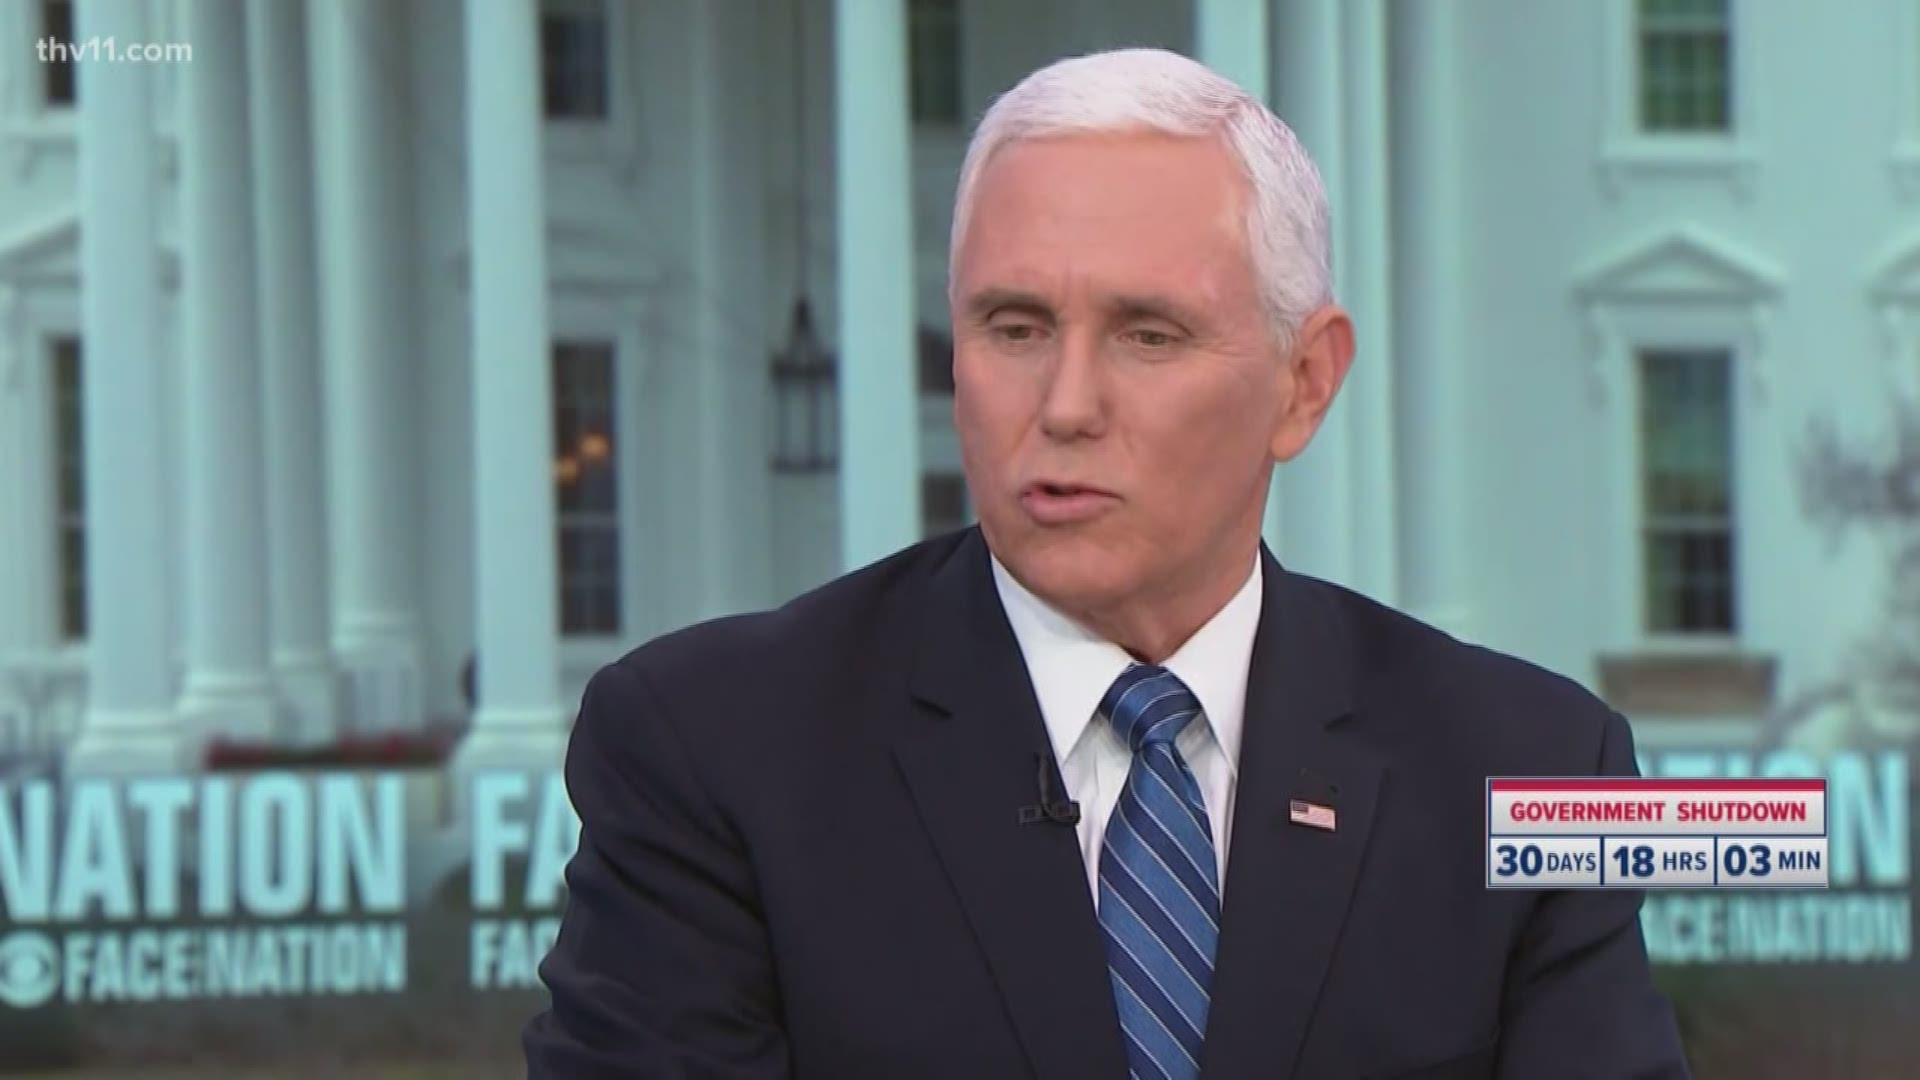 Vice President Mike Pence was criticized after appearing on CBS' "Face the Nation" and quoting Rev. Martin Luther King Jr. to defend the U.S.-Mexico border wall.